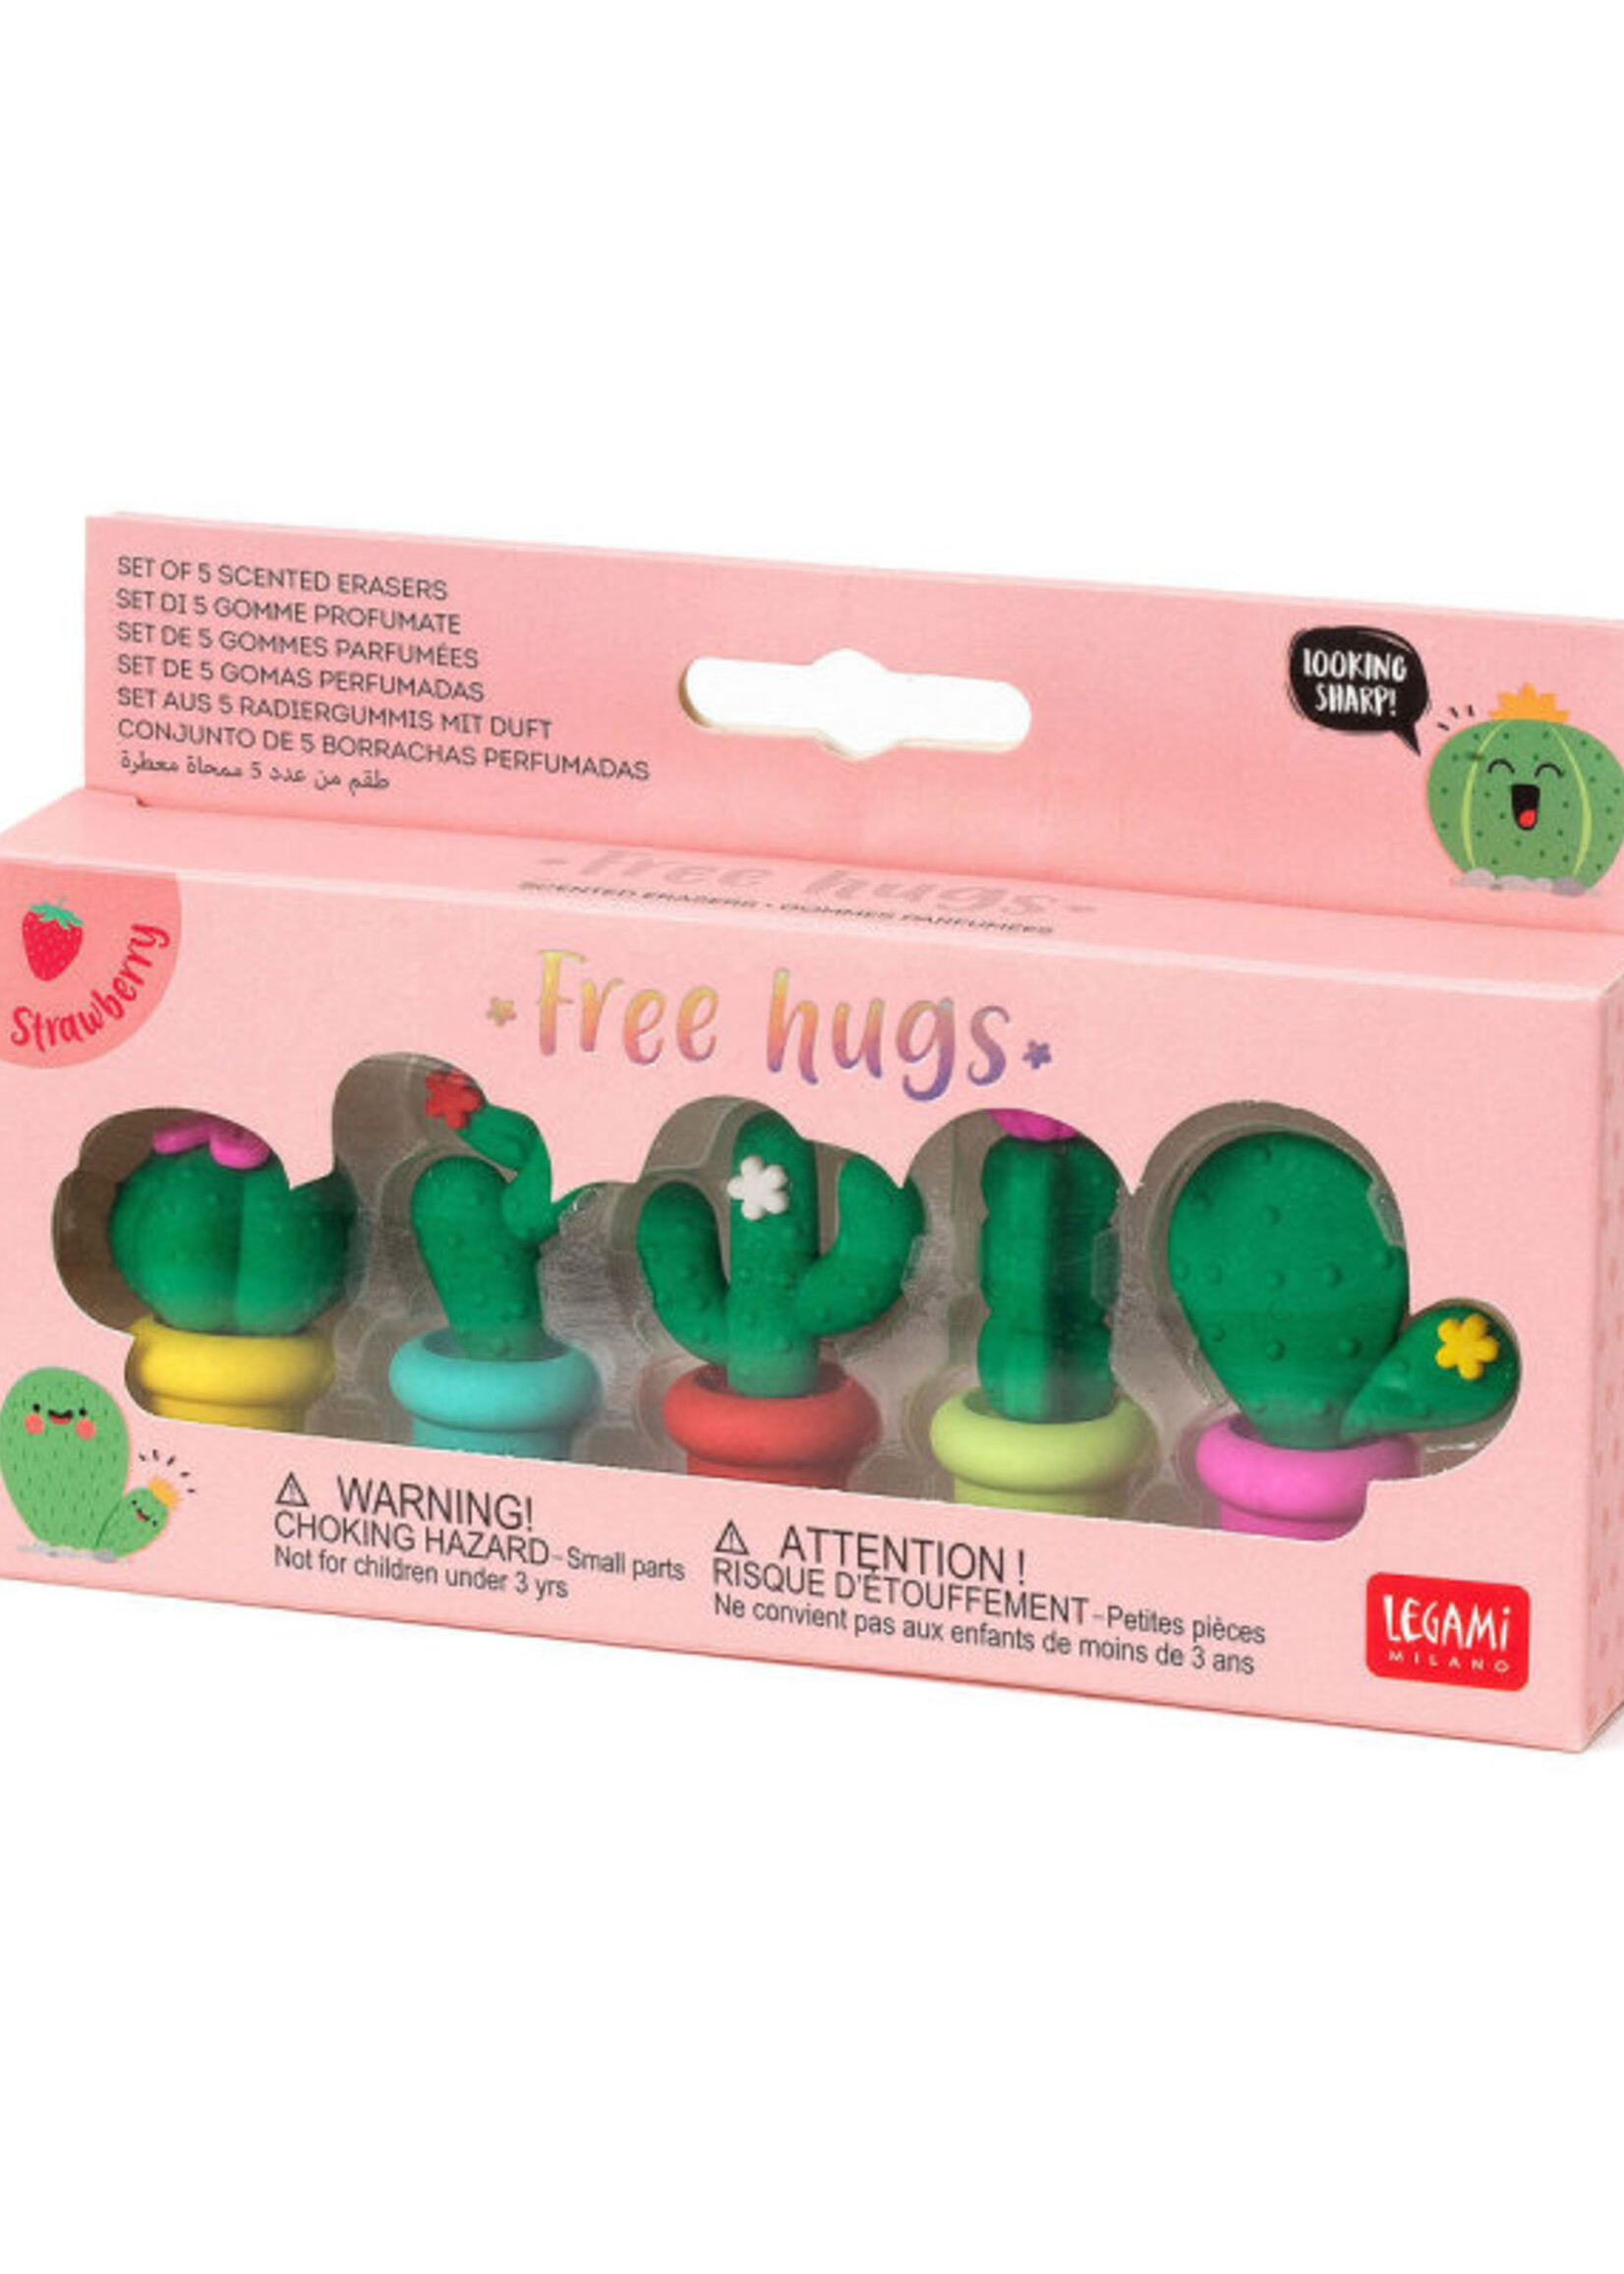 LEGAMI SET OF 5 SCENTED ERASERS FREE